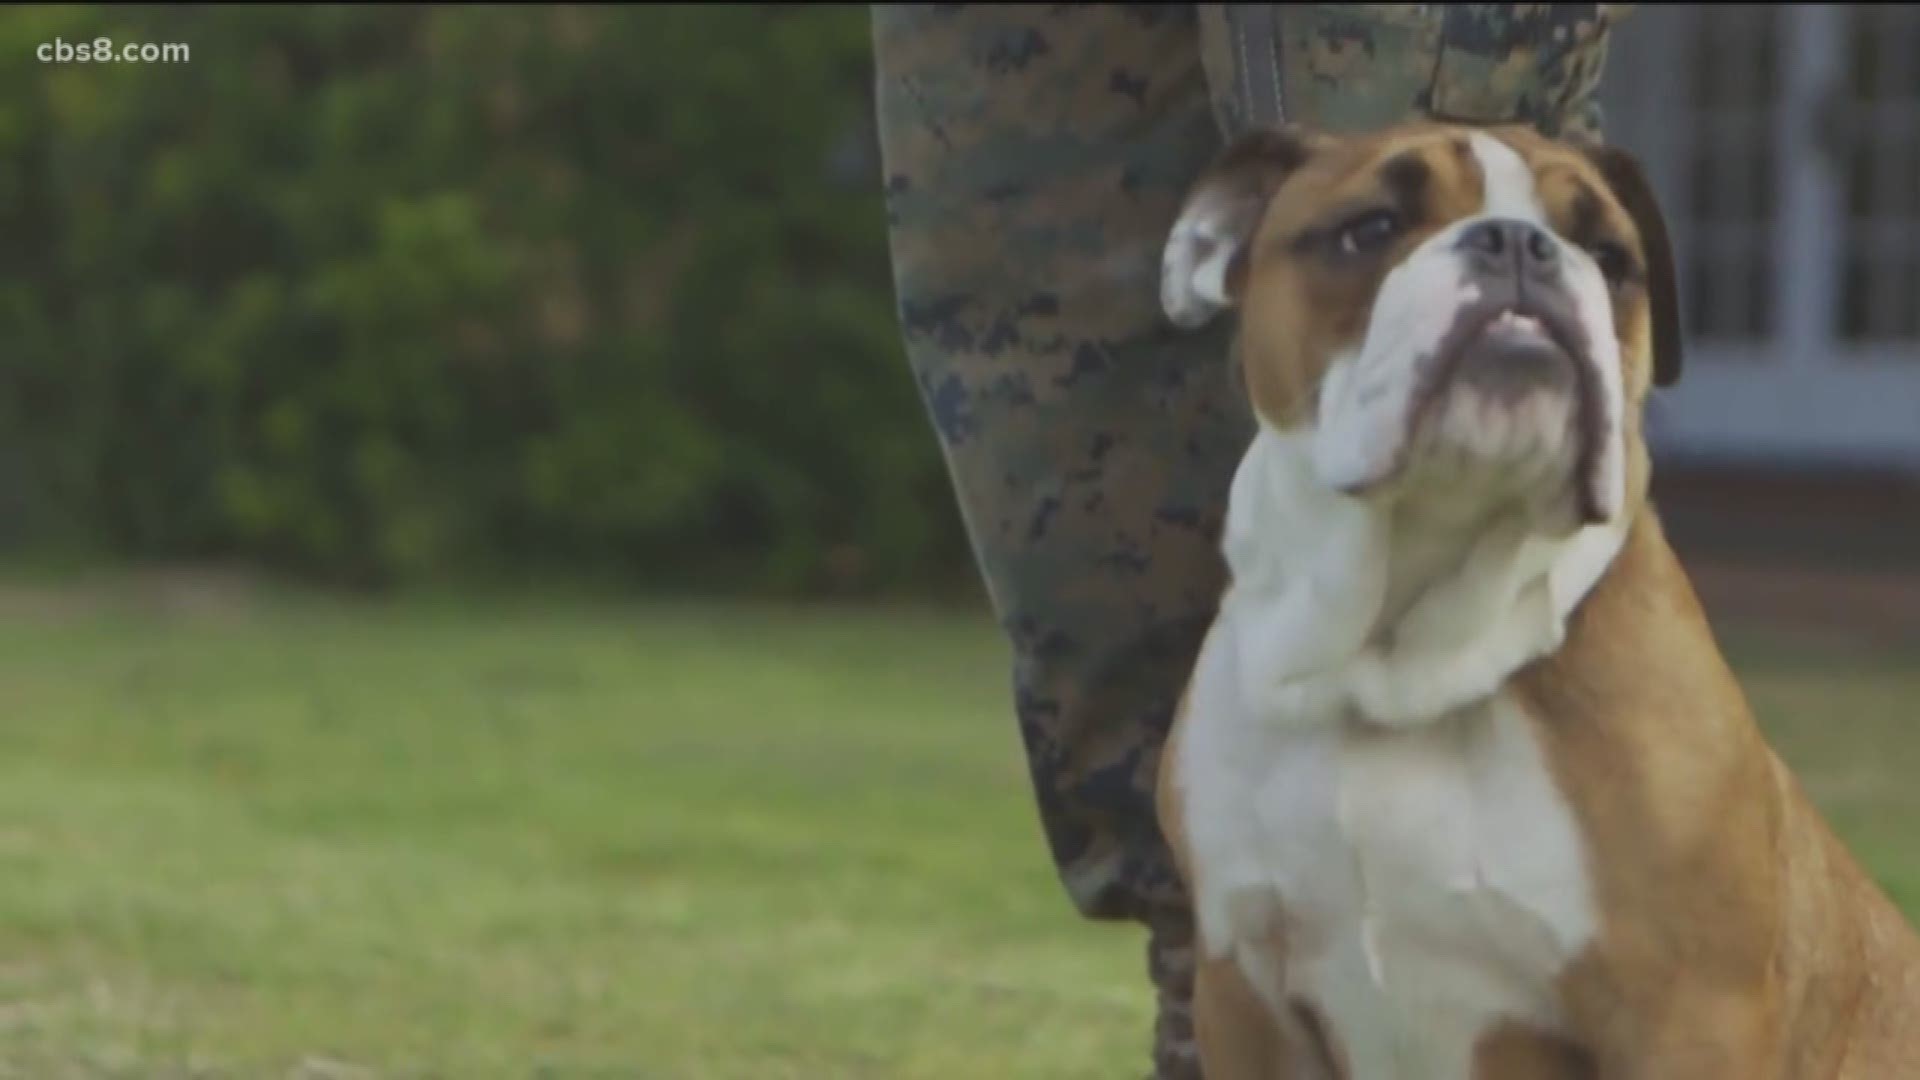 Manny is a nine-month-old English Bulldog puppy with a bark that's bigger than his bite.